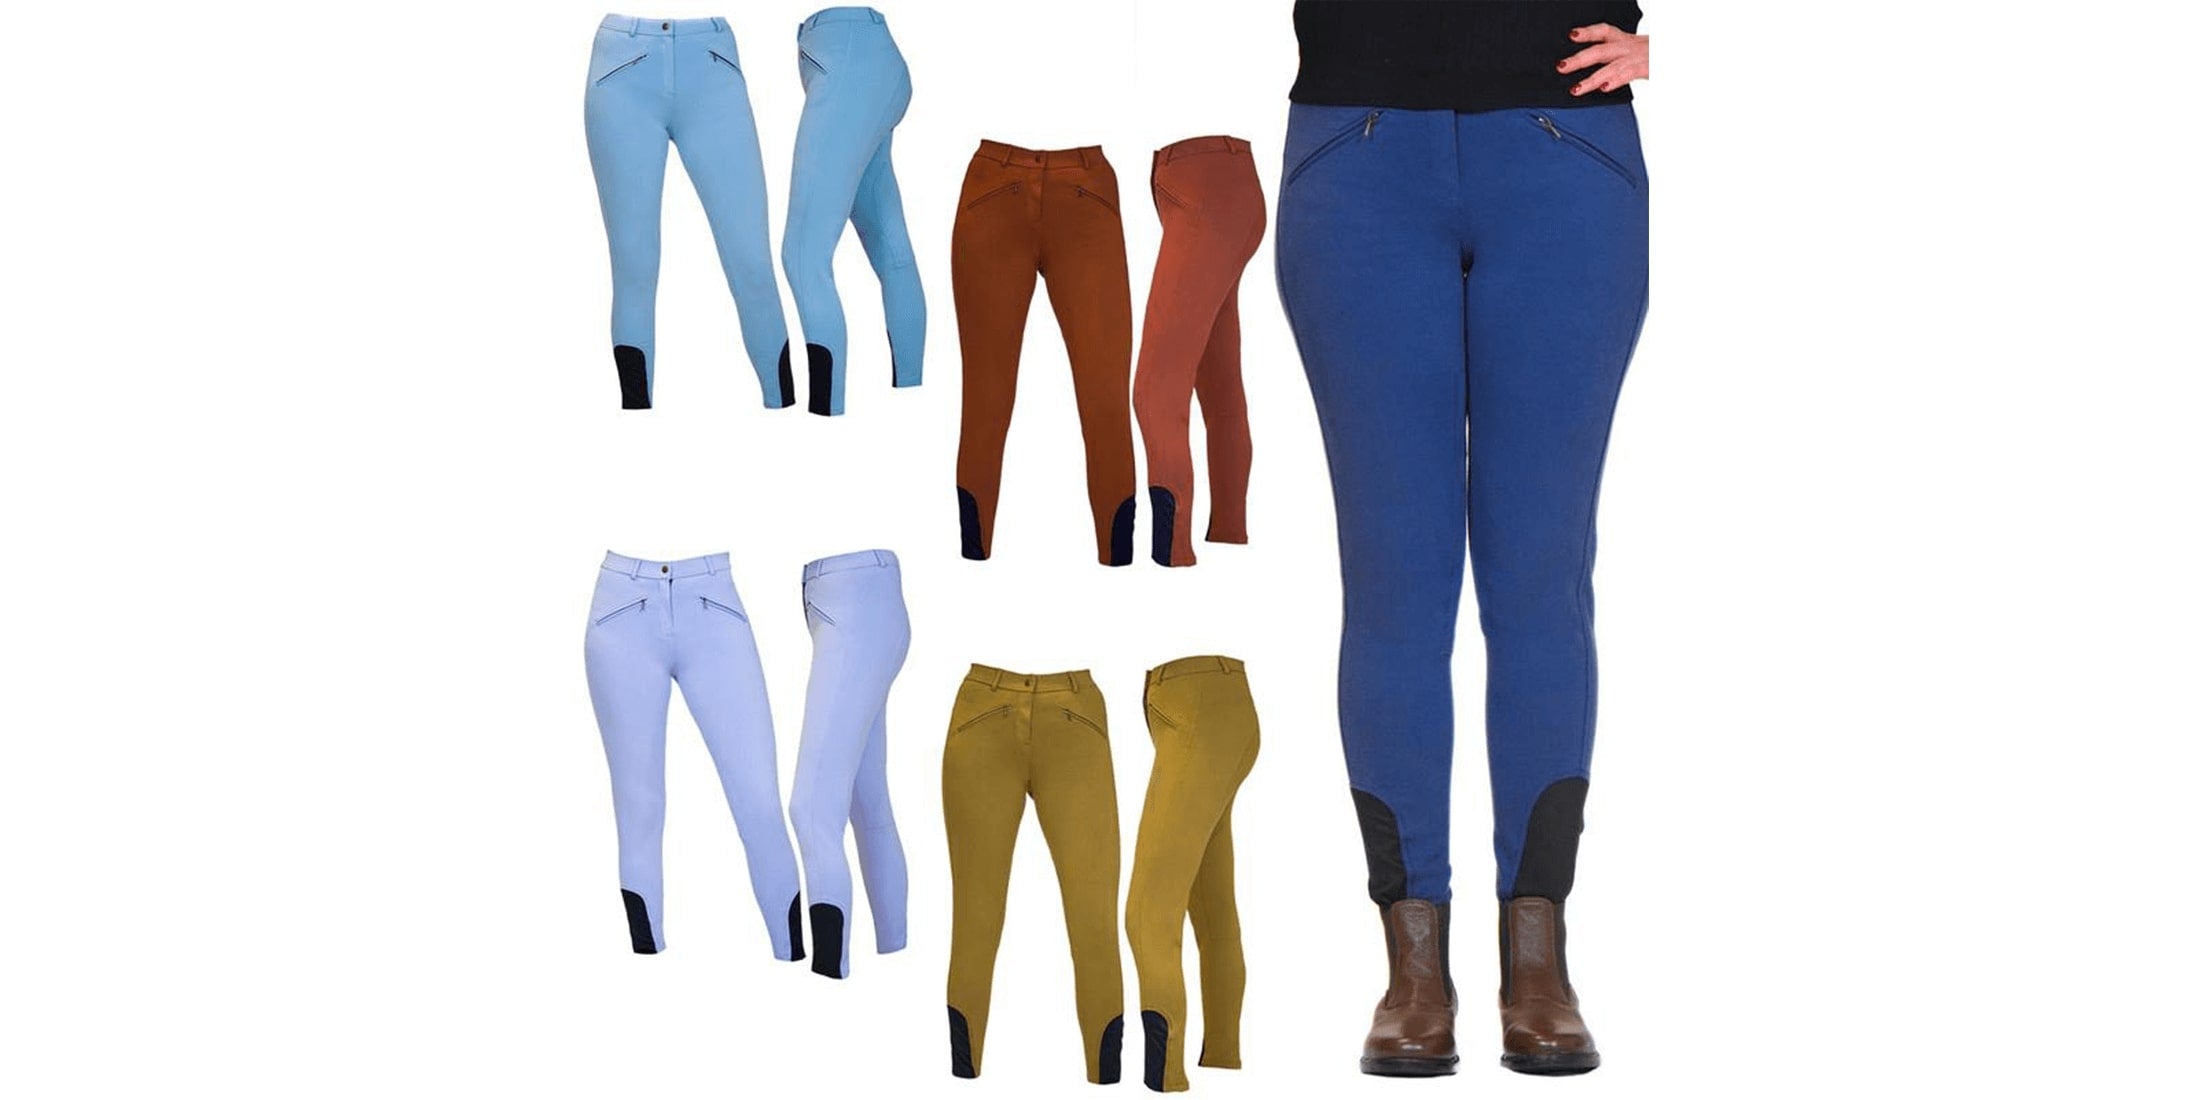 How Can Women Care for Their Jodhpurs to Ensure They Last?